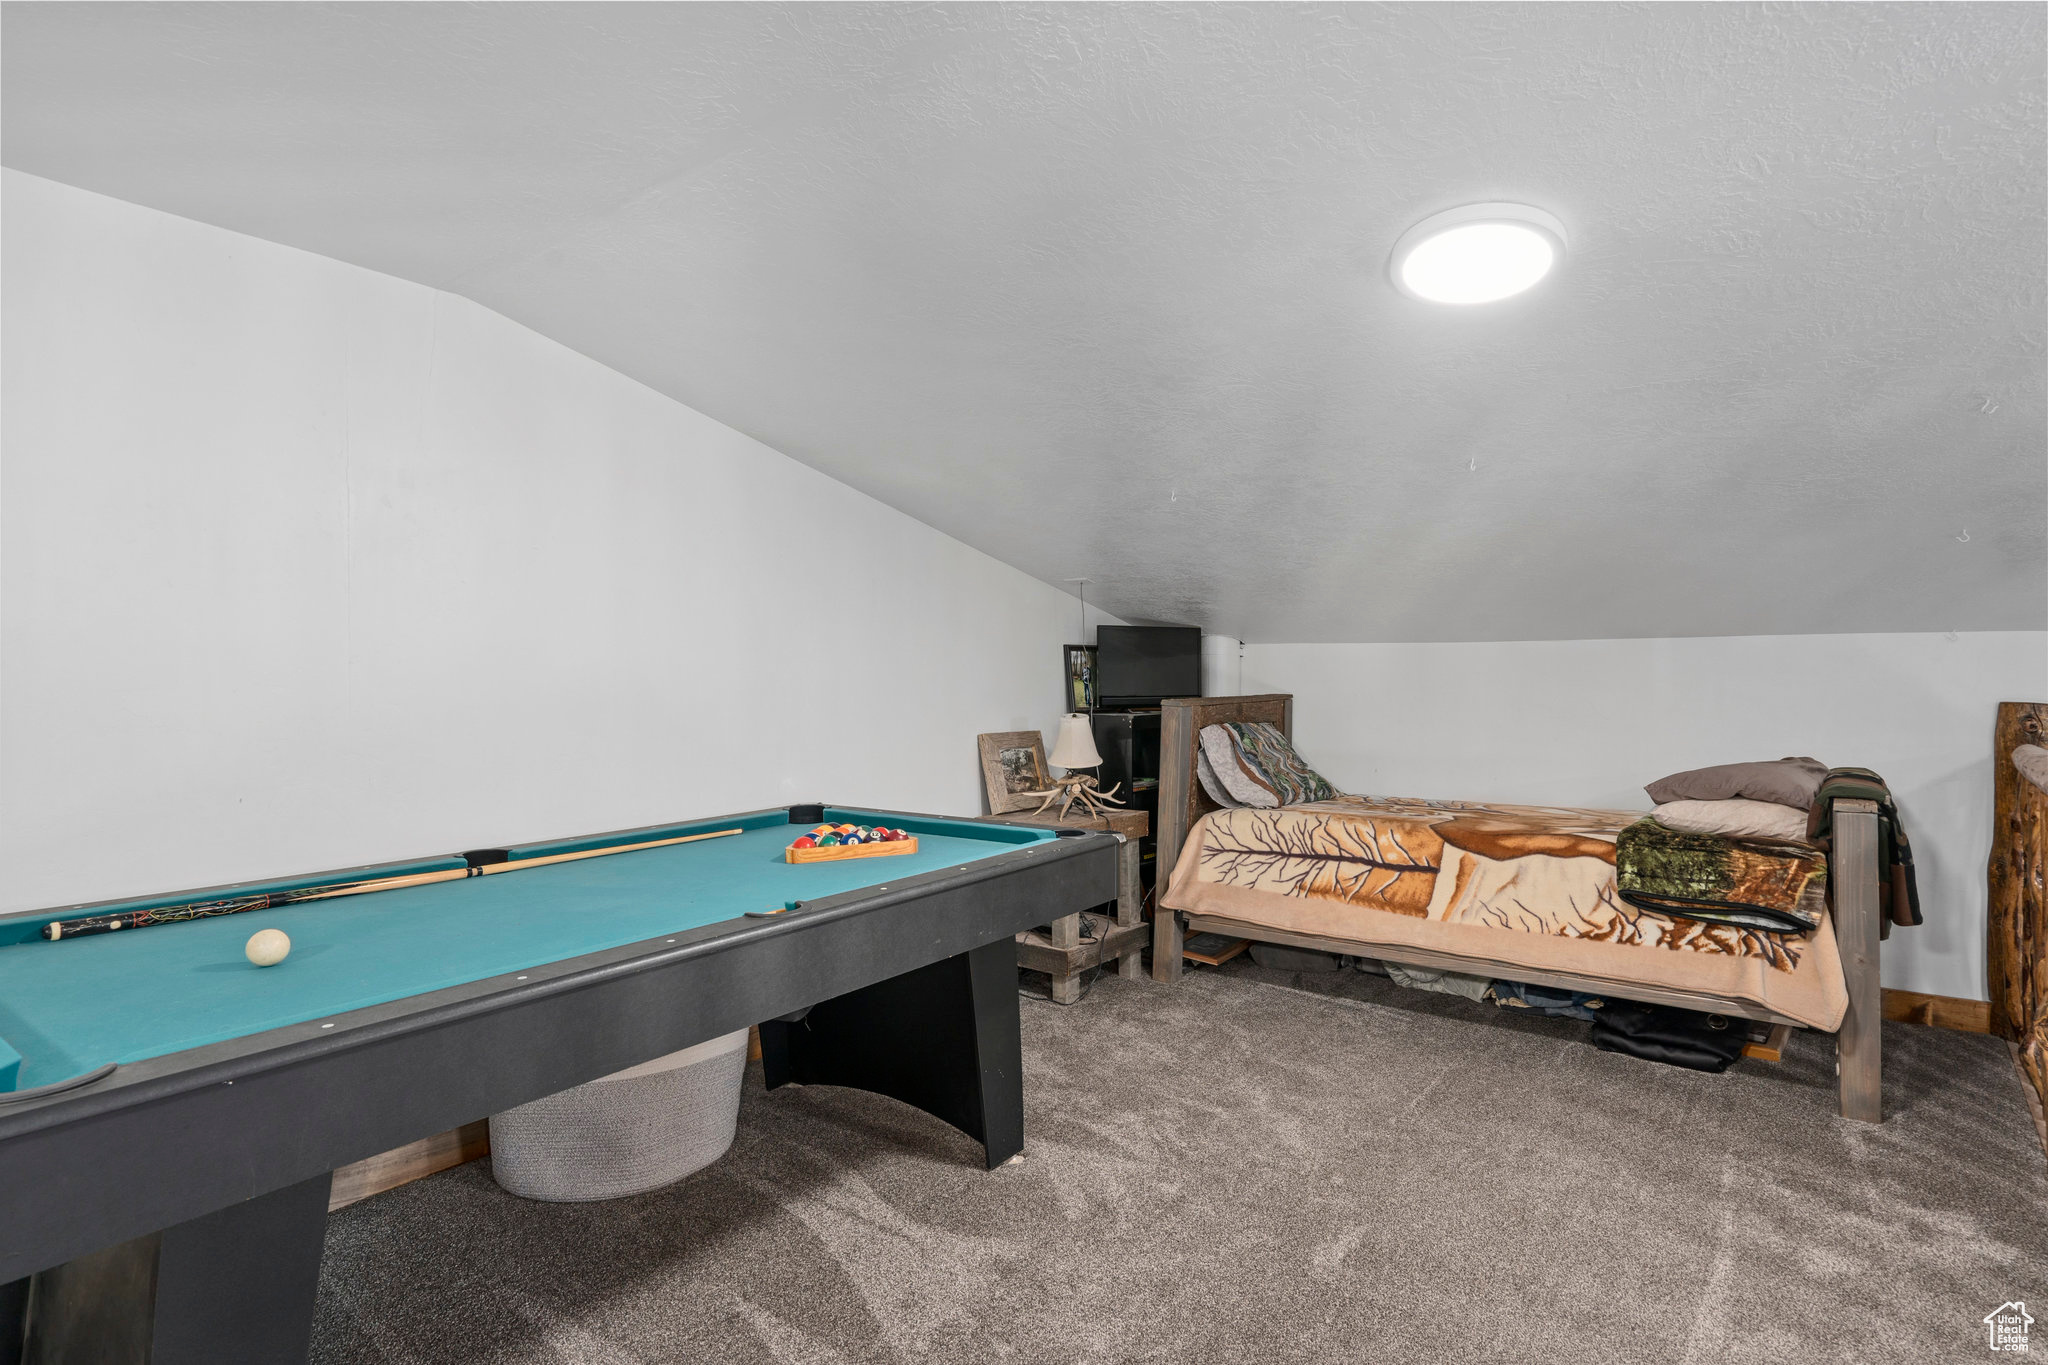 Game room with lofted ceiling, carpet, and pool table